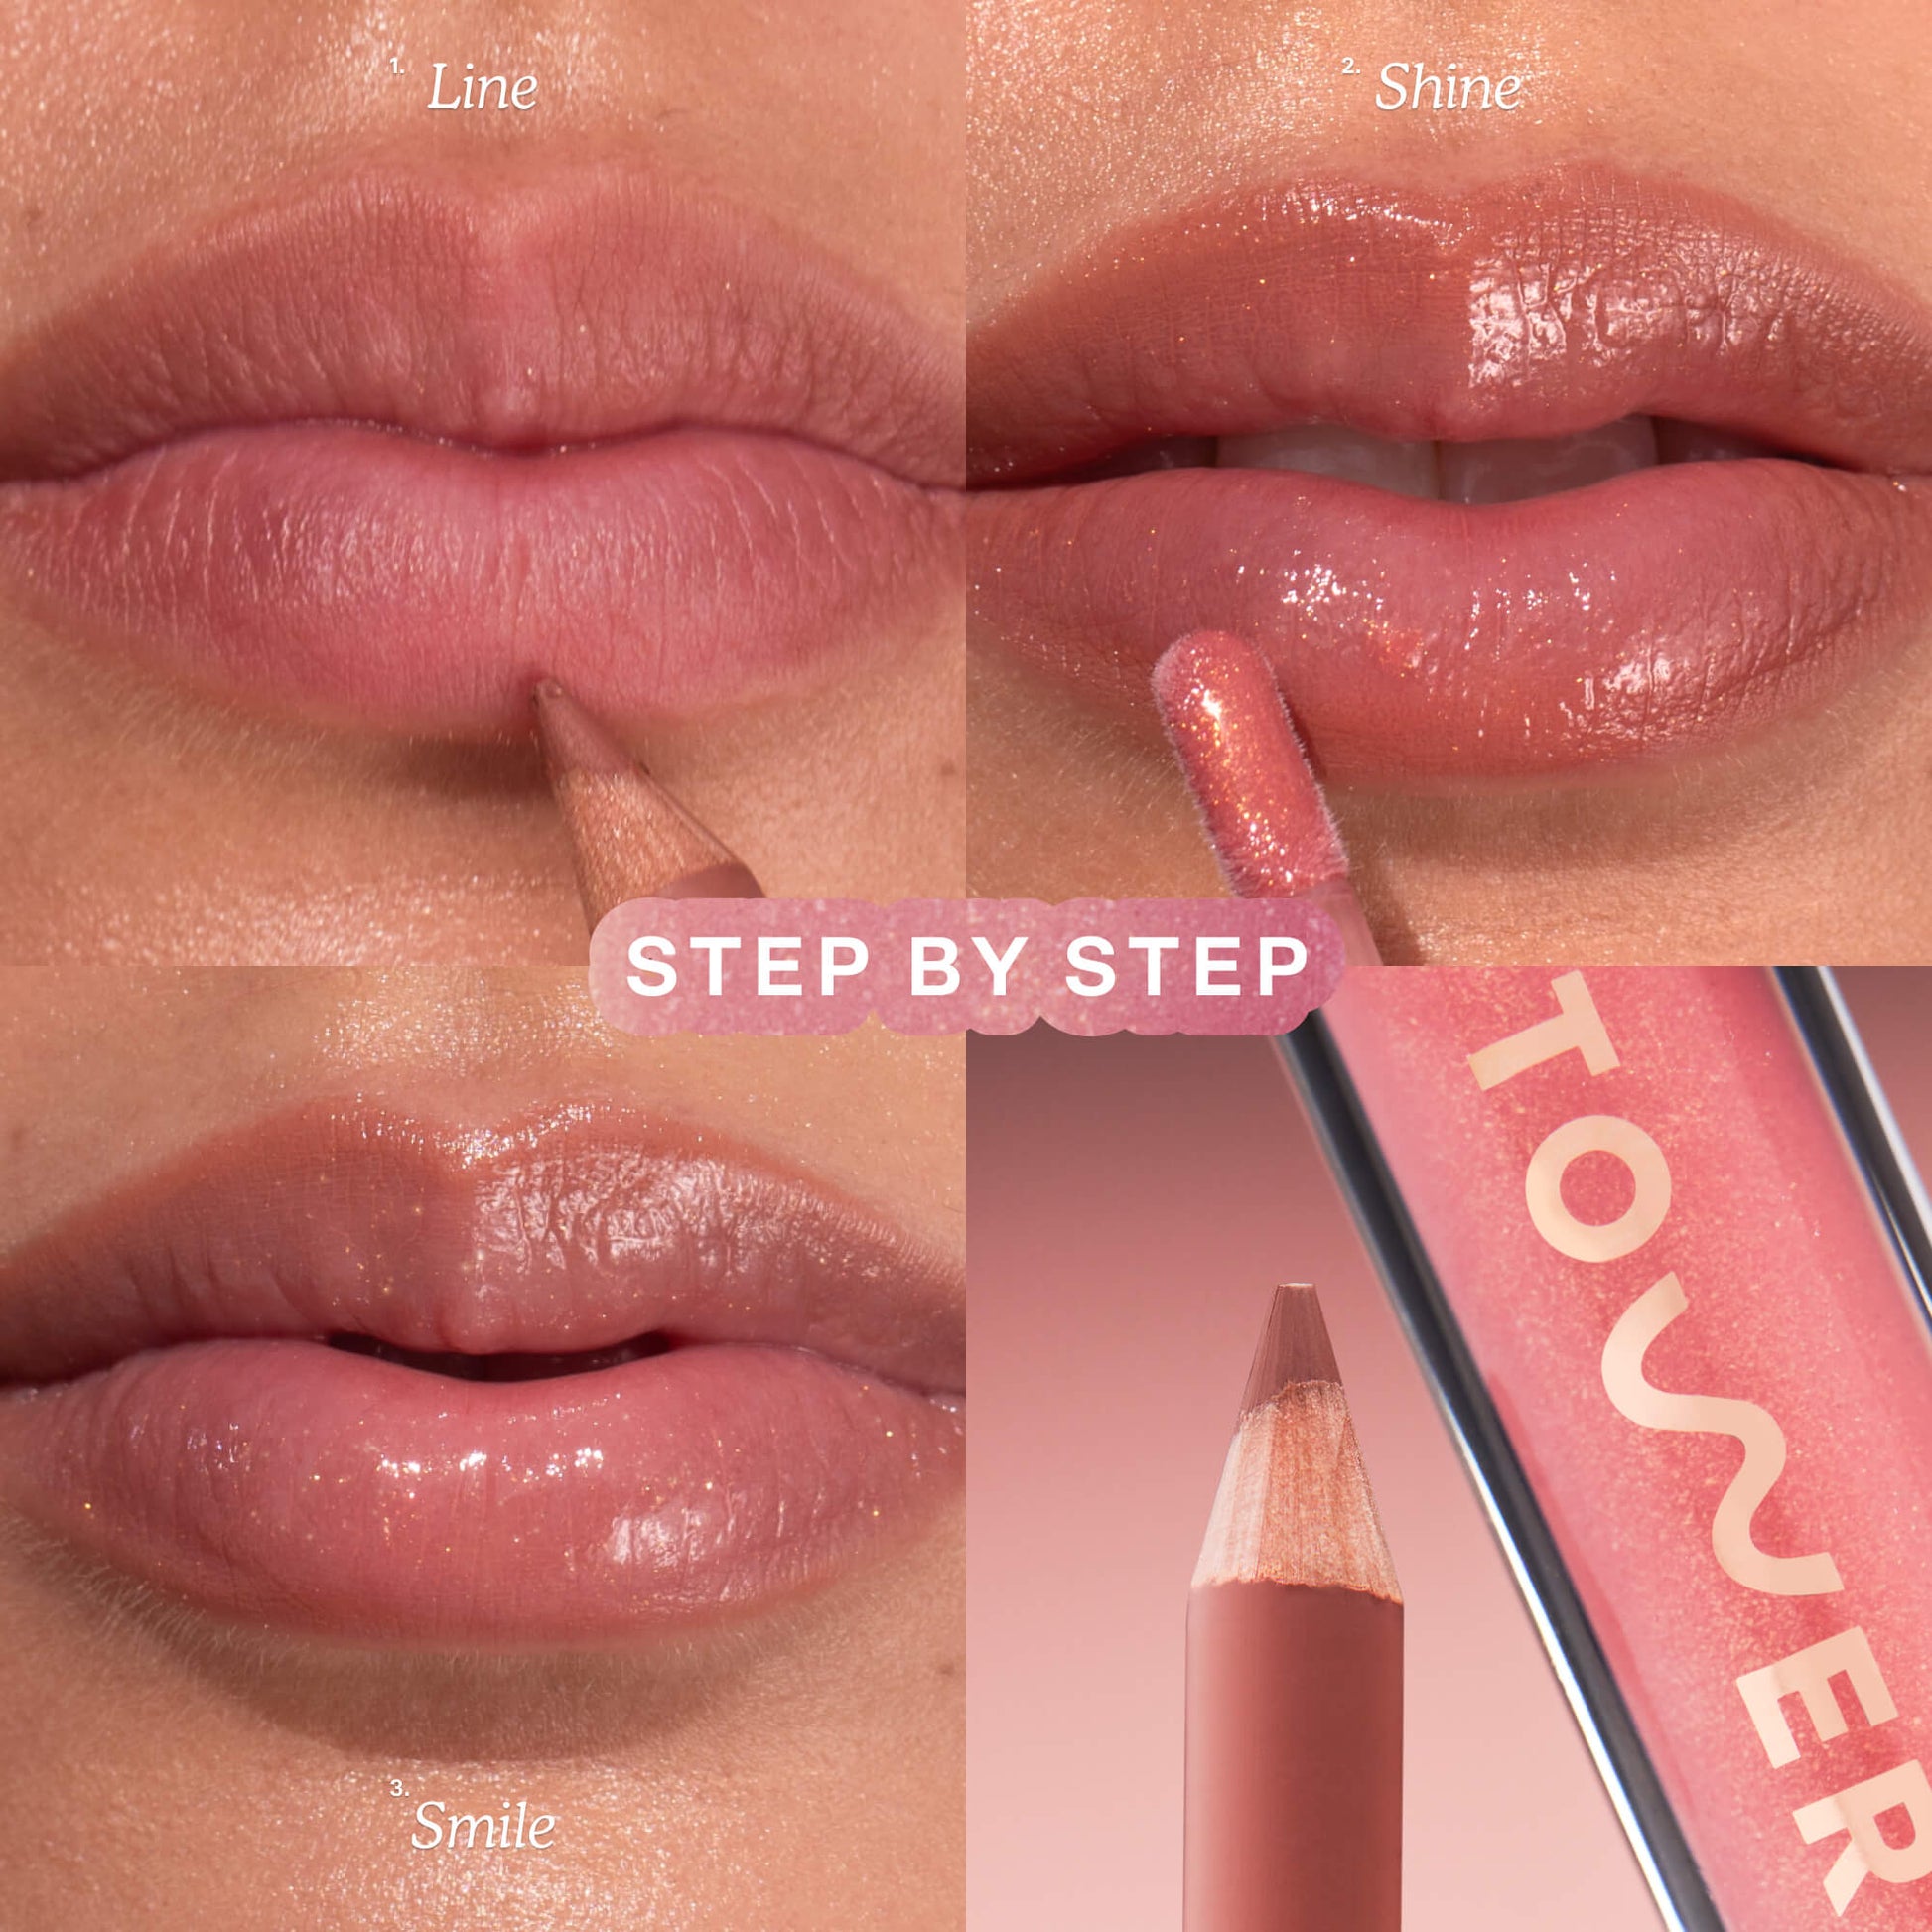 [Shared: A model wearing the Tower 28 Beauty Line + Shine Lip Kit  on her lips.